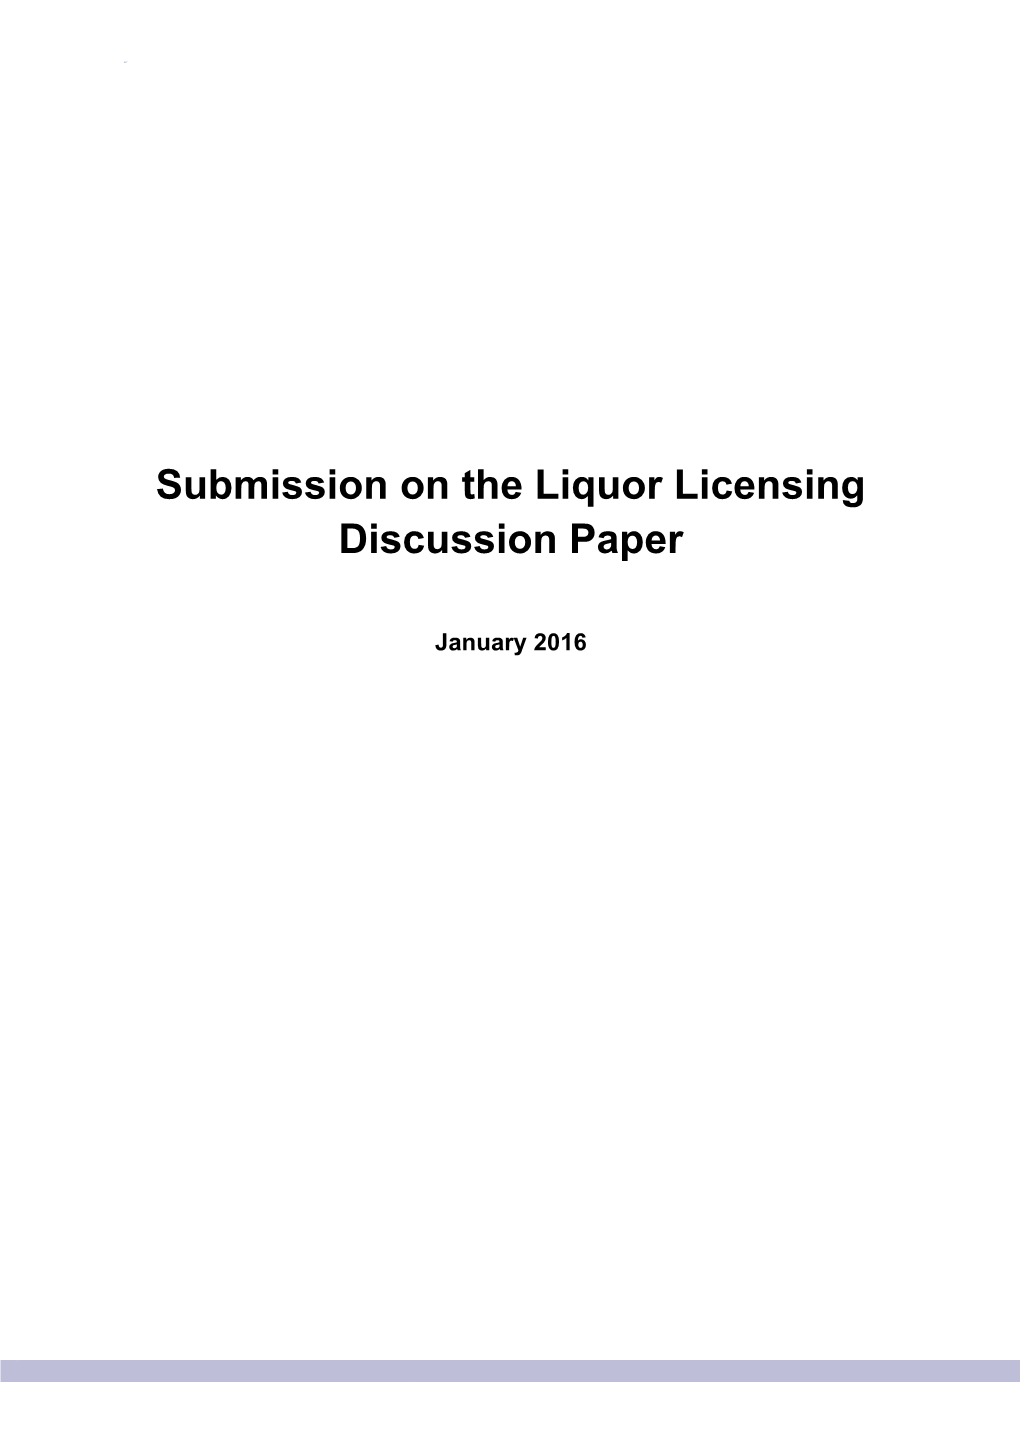 Submission on the Liquor Licensing Discussion Paper